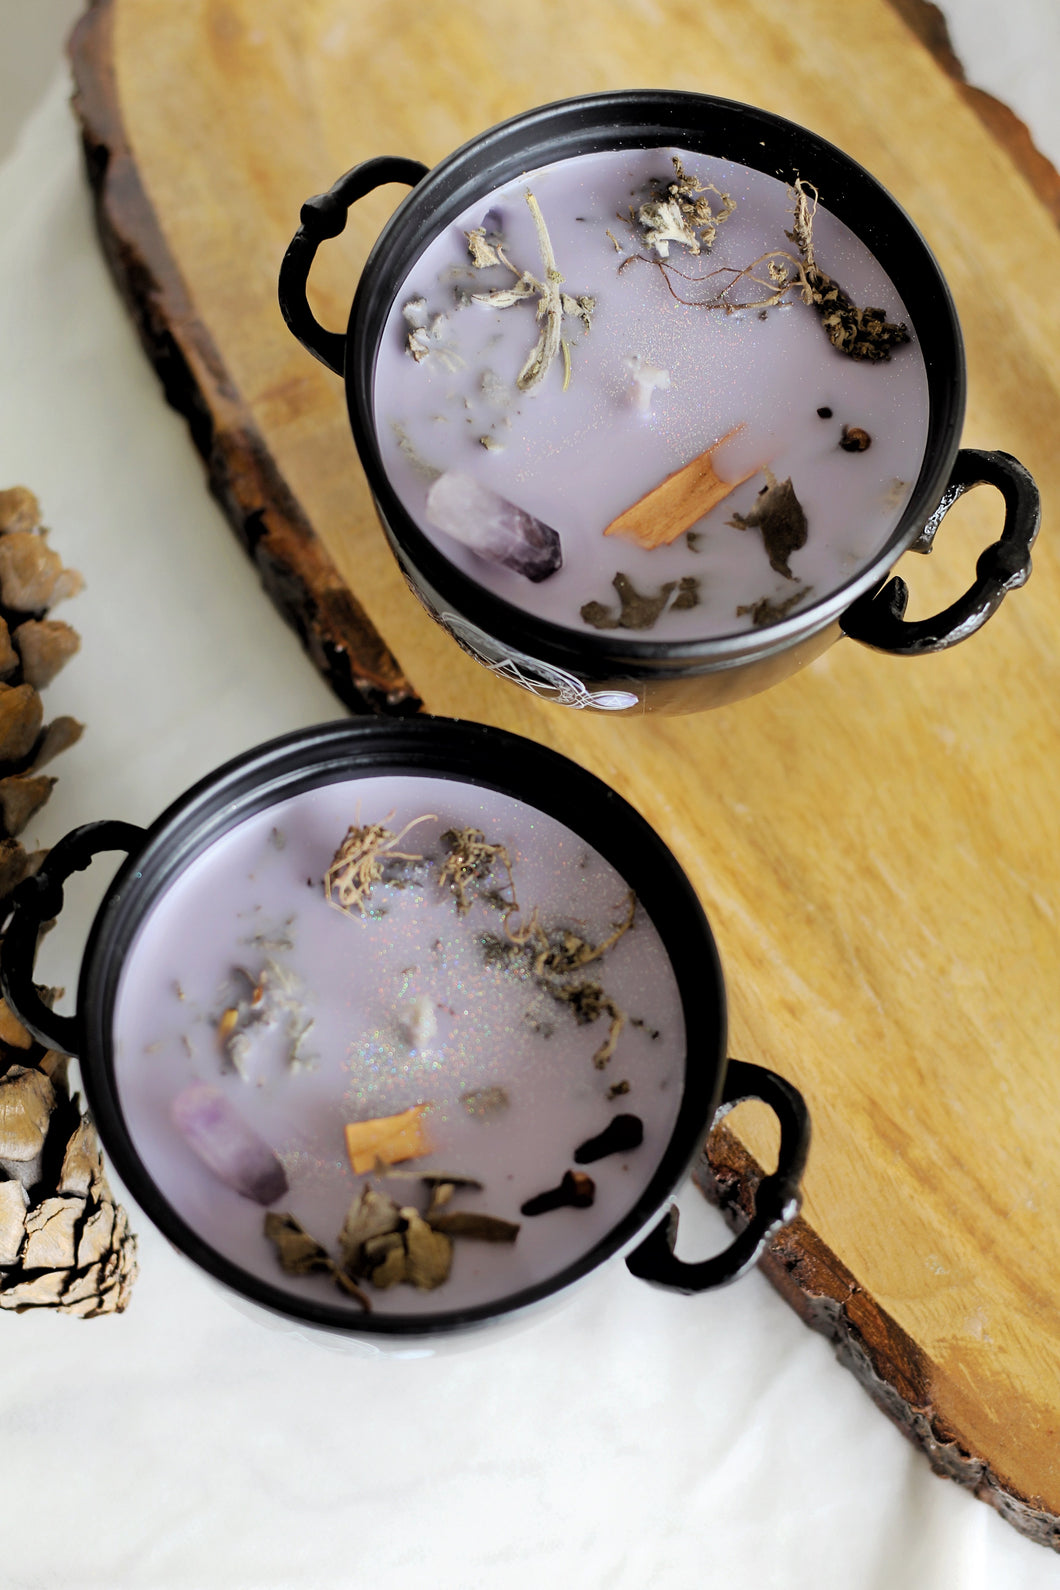 Cleansing & Purification Cauldron Candle